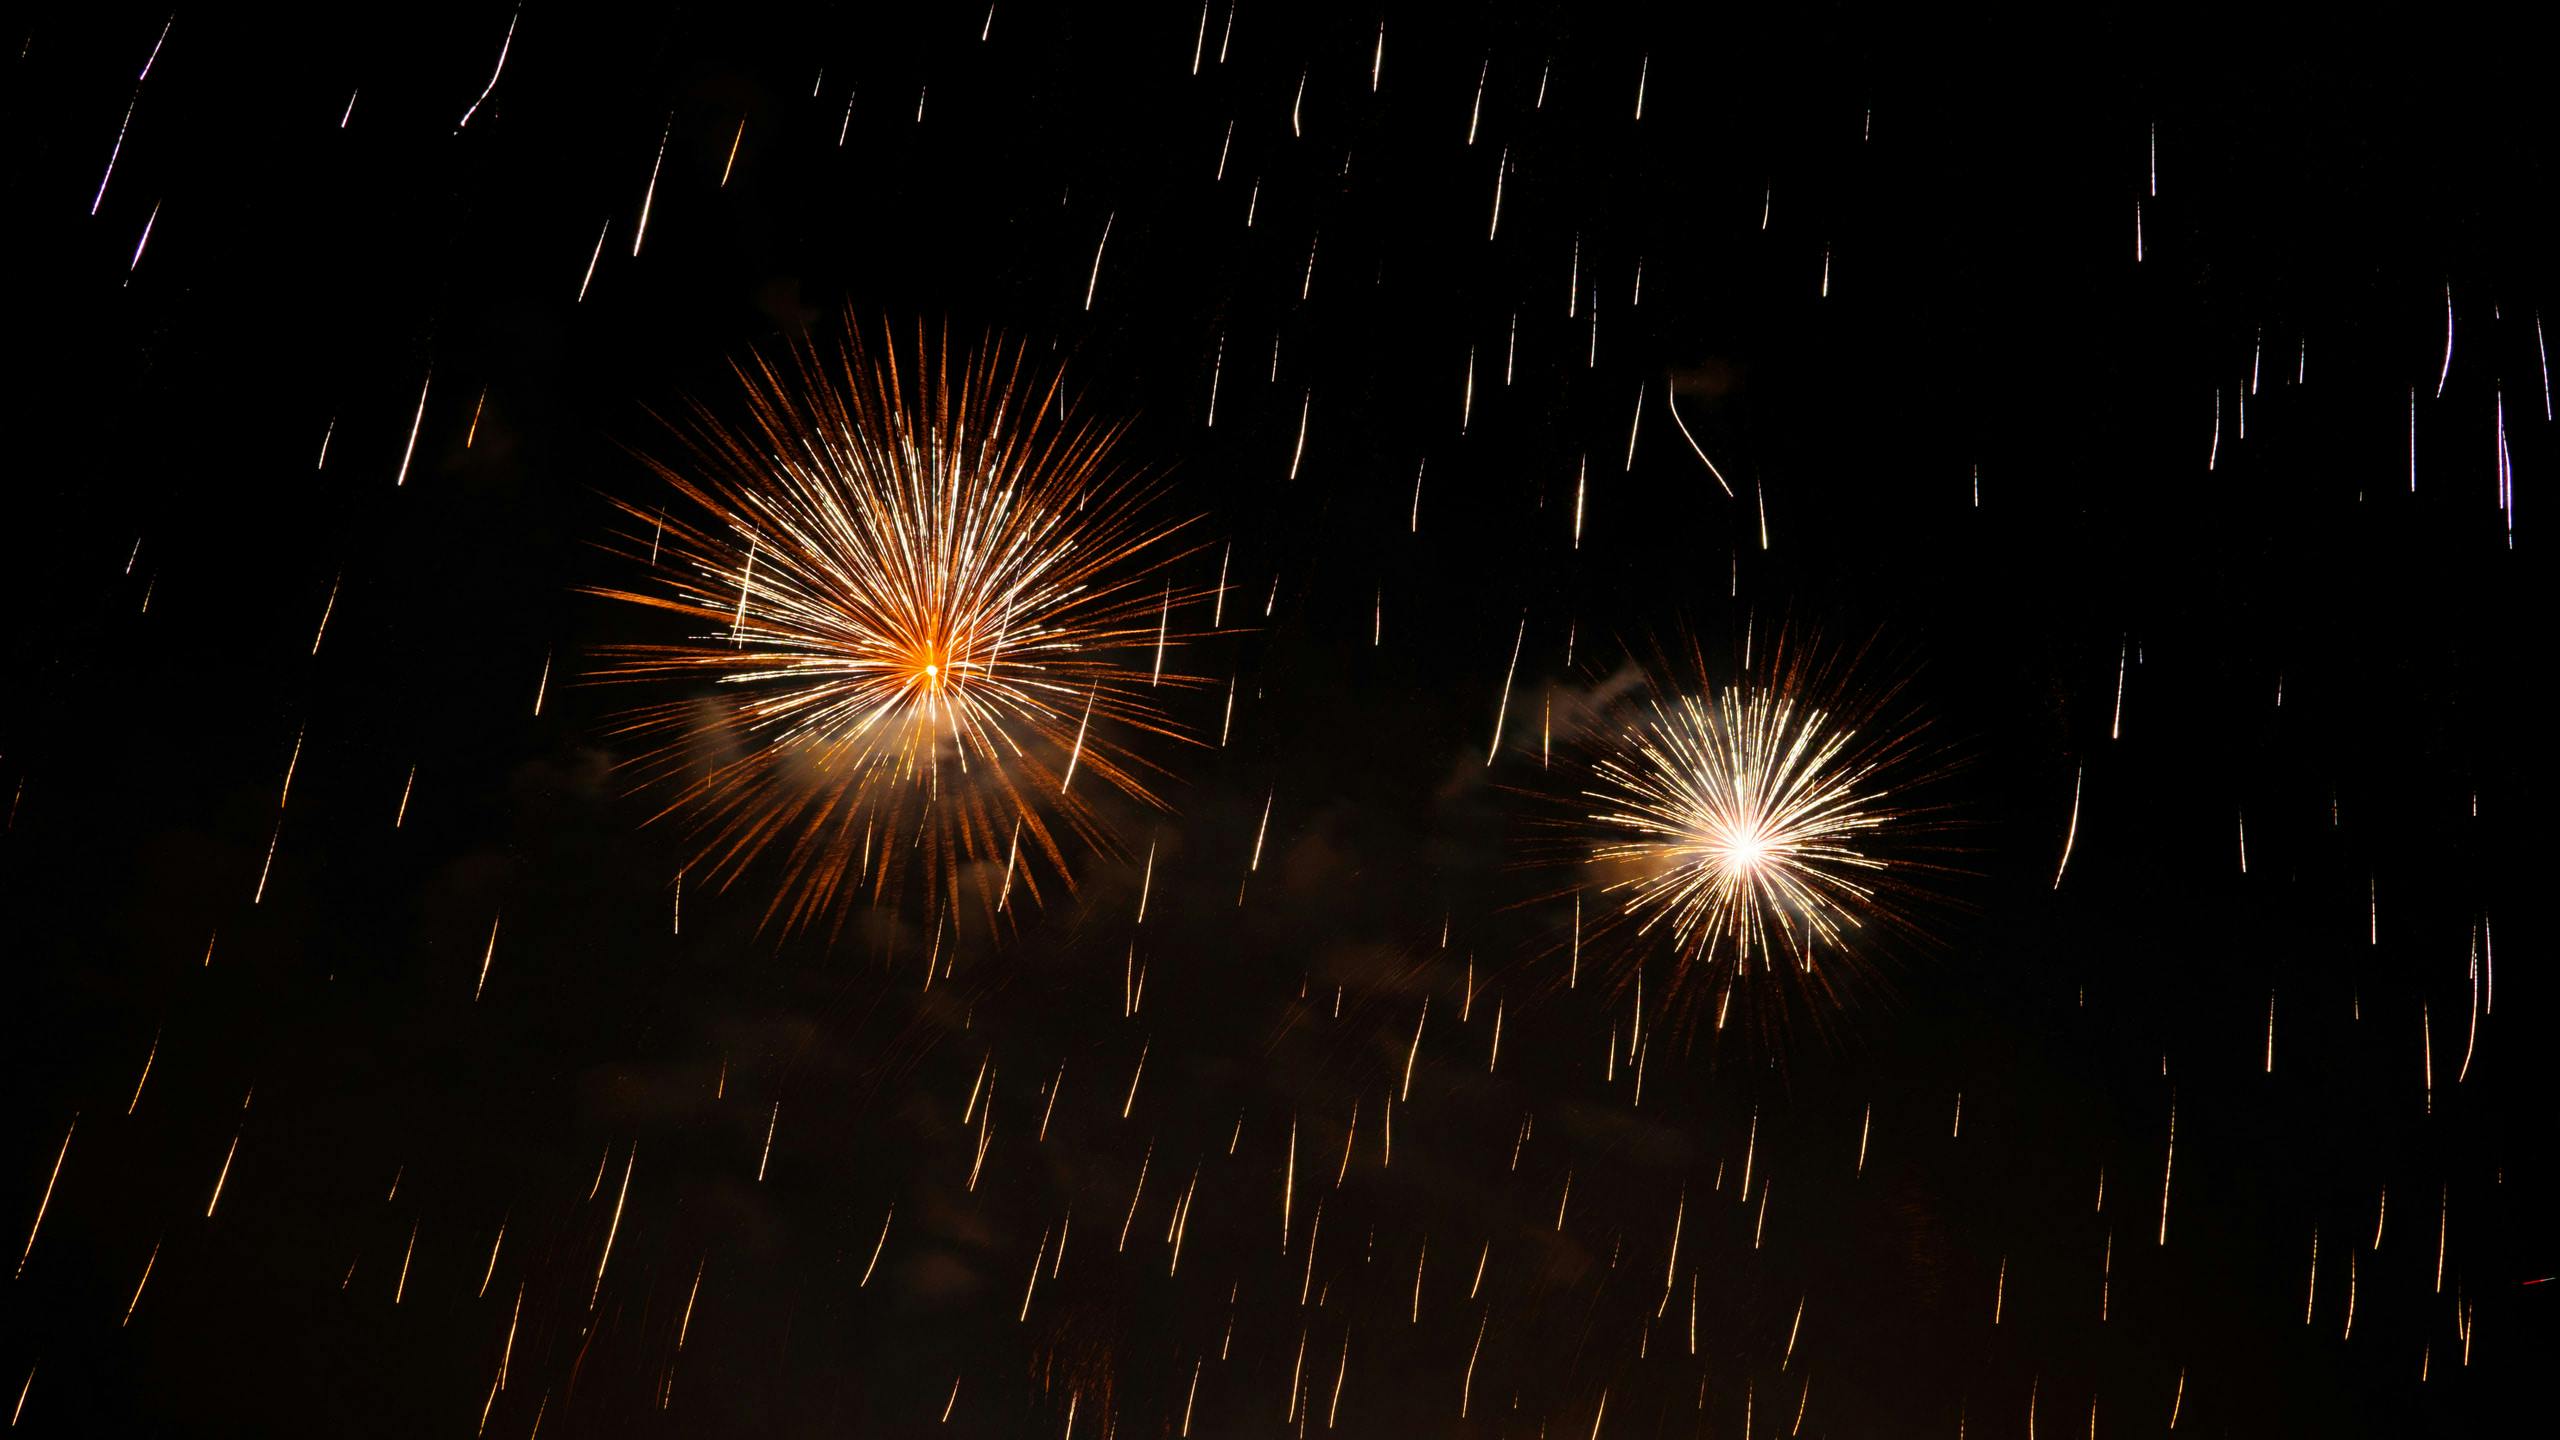 Fireworks with rainy strokes of sparks falling down